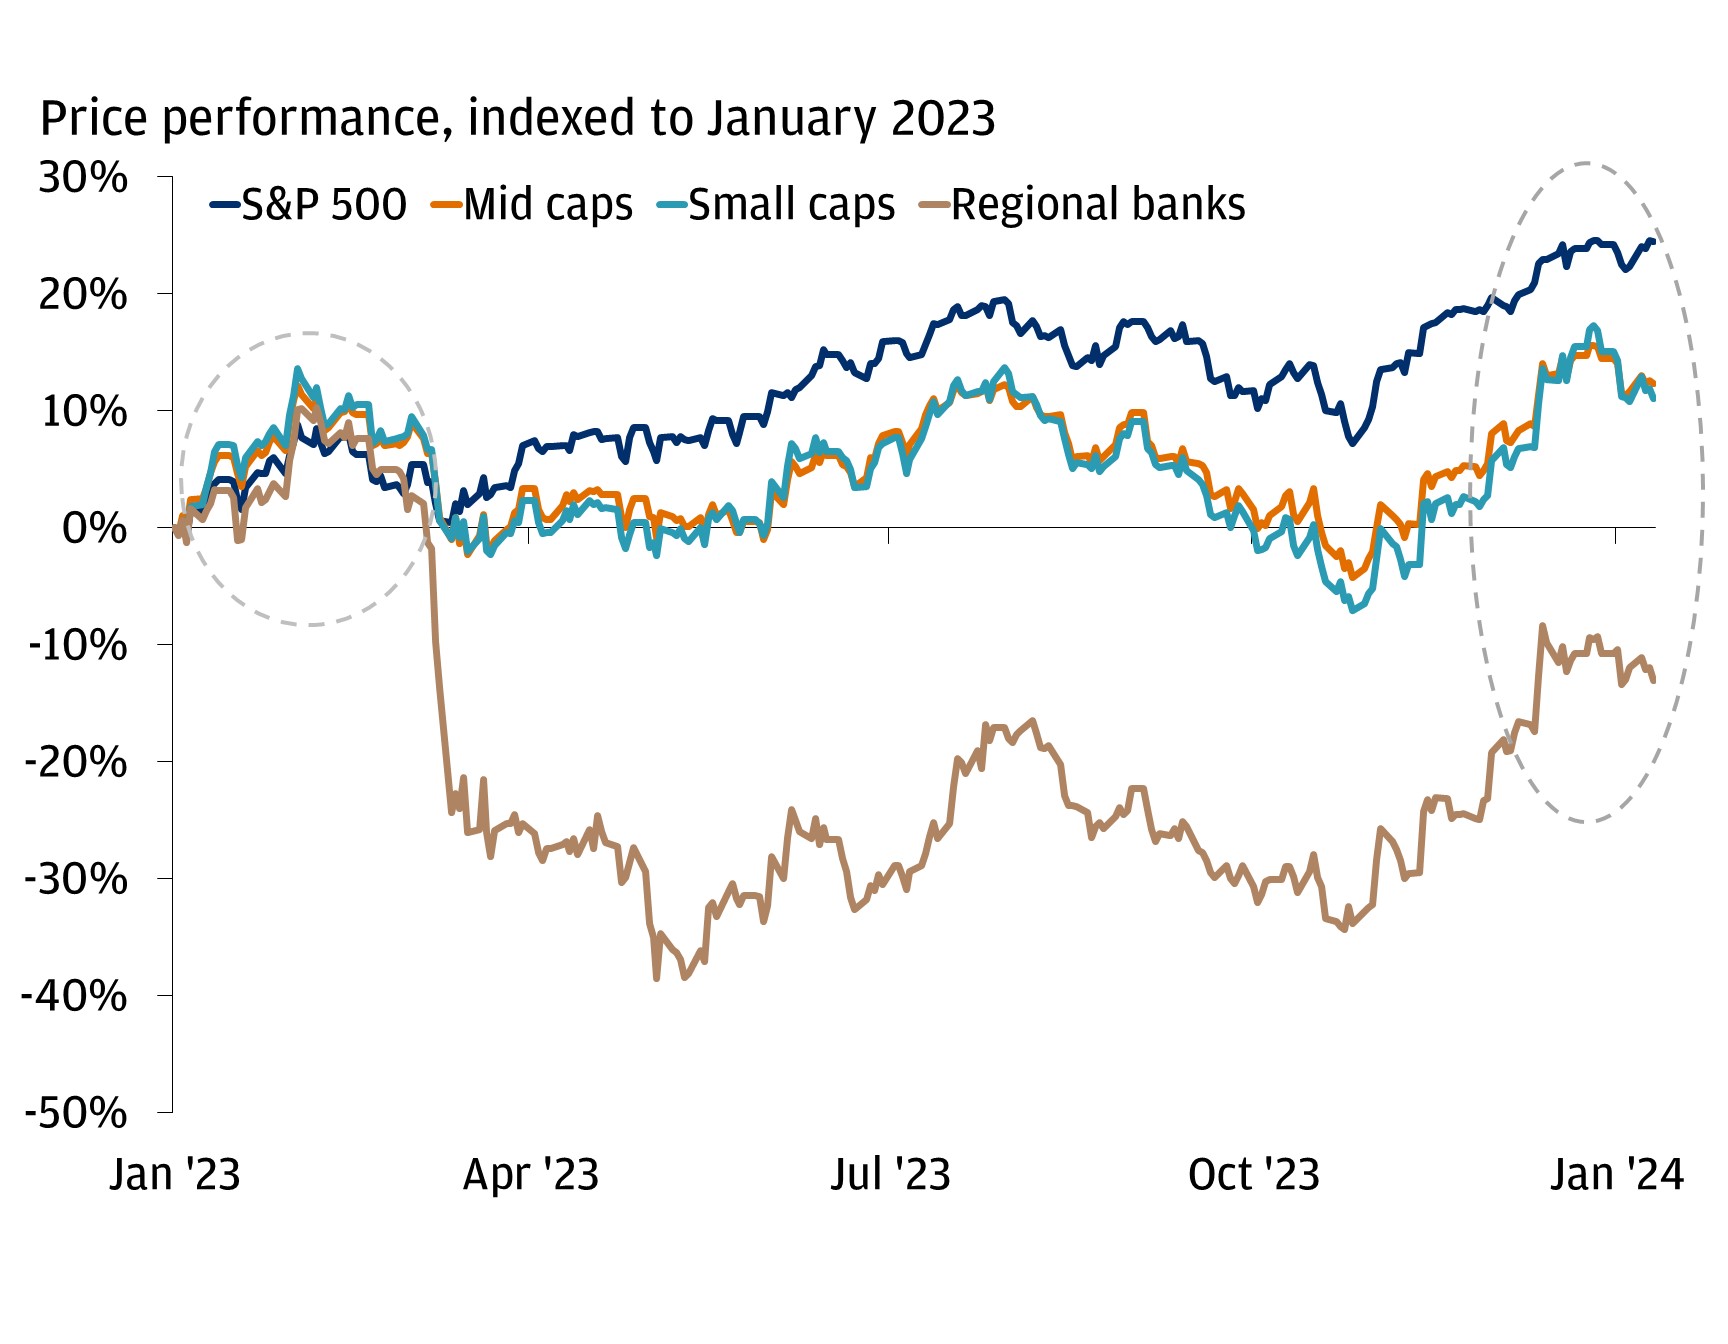 This chart shows price performance, indexed to the beginning of 2024, of the S&P 500, small- and mid-cap companies, and regional banks from January 2023 to January 2024.